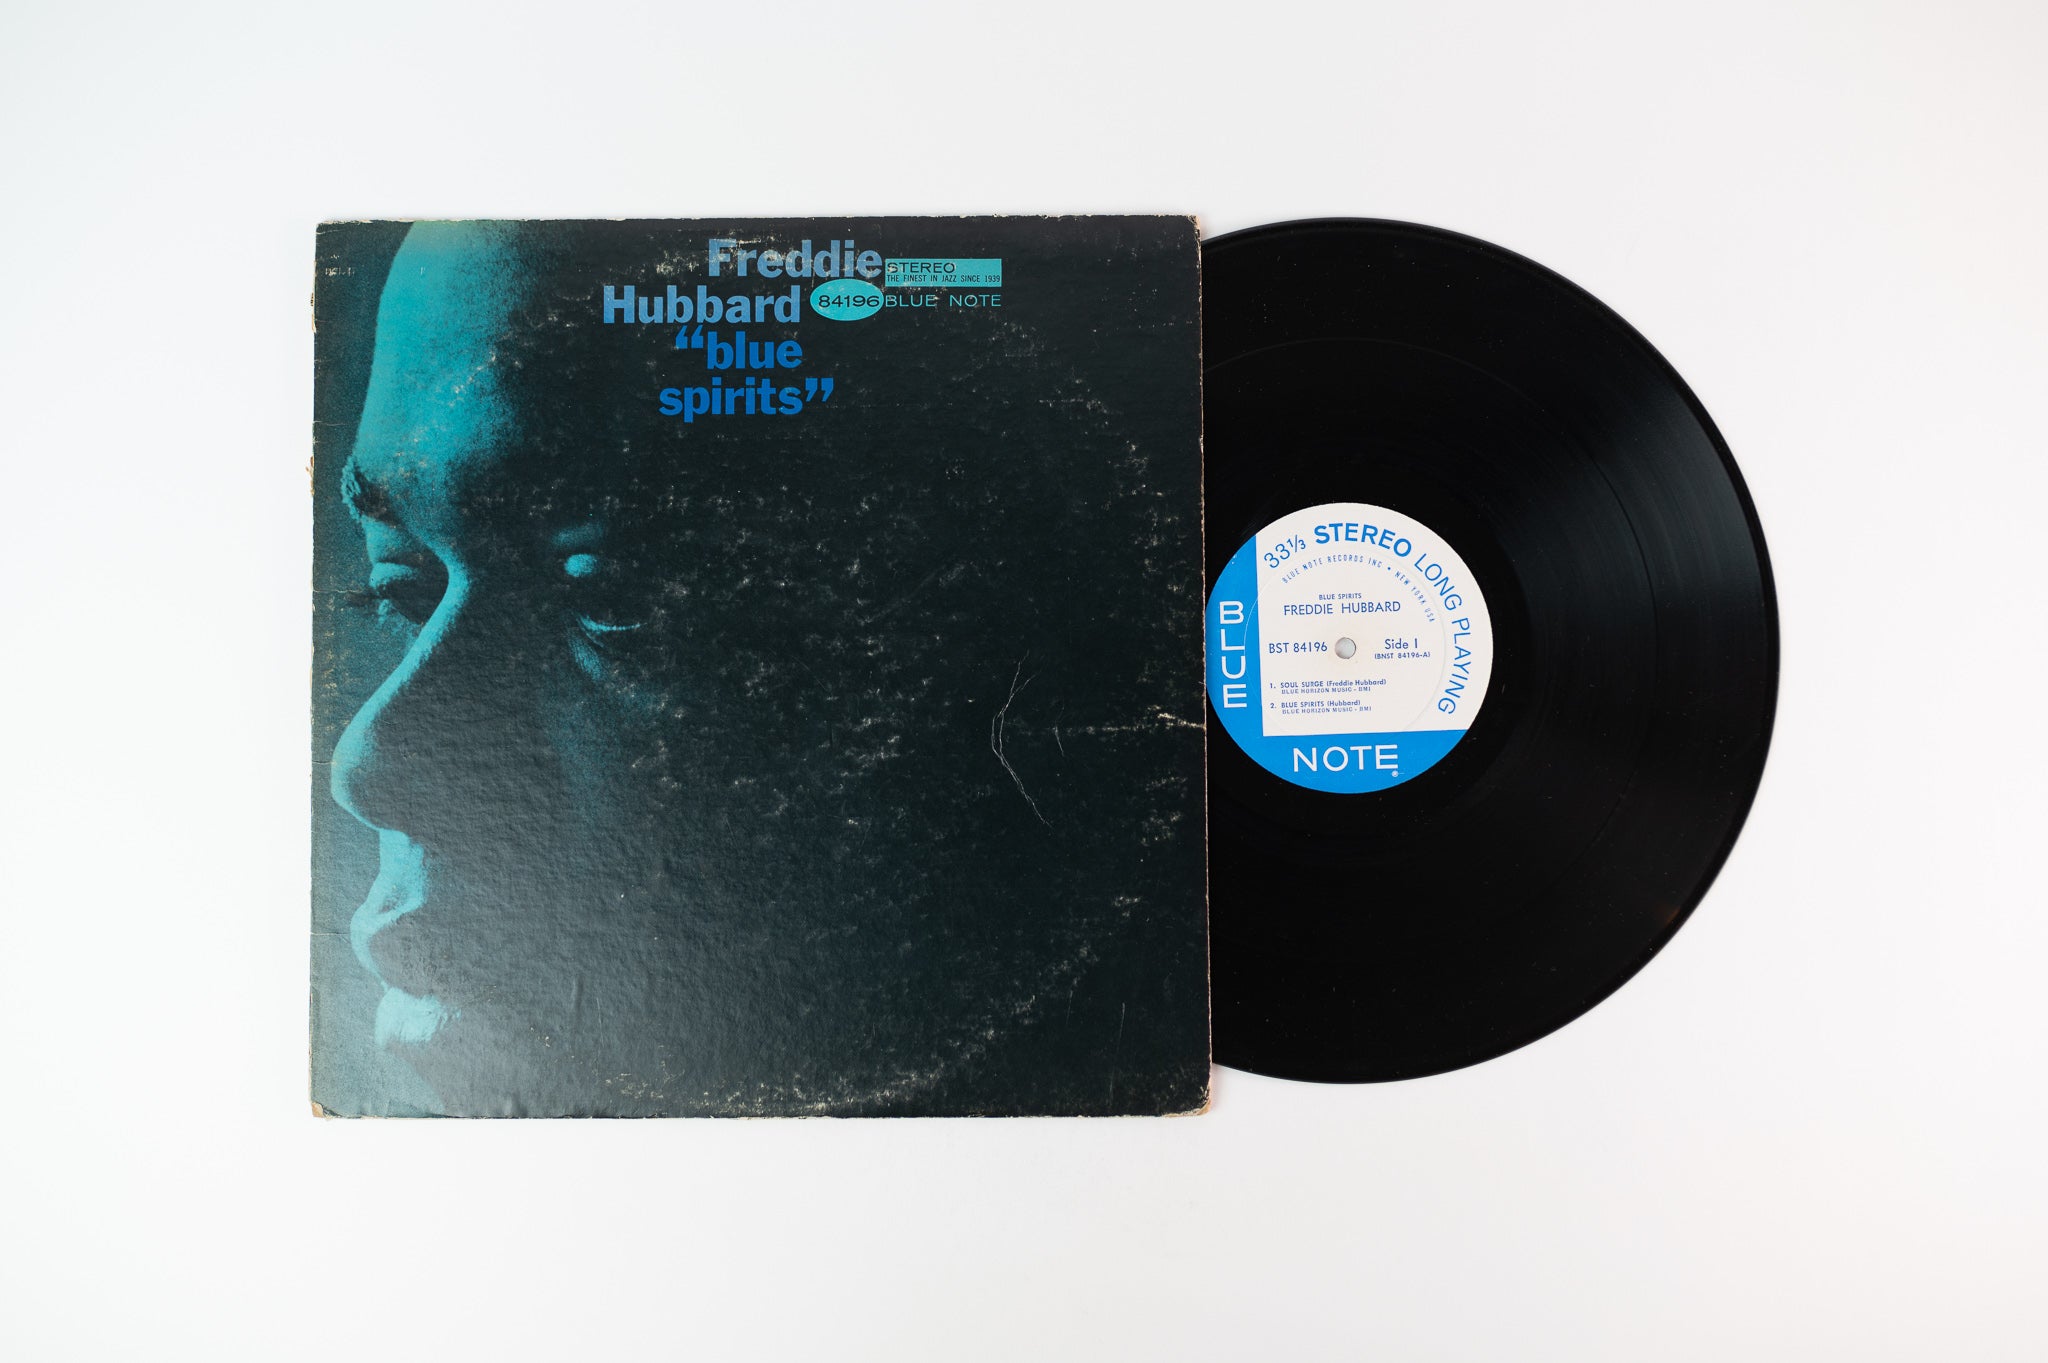 Freddie Hubbard - Blue Spirits on Blue Note BST 84196 NY Stereo